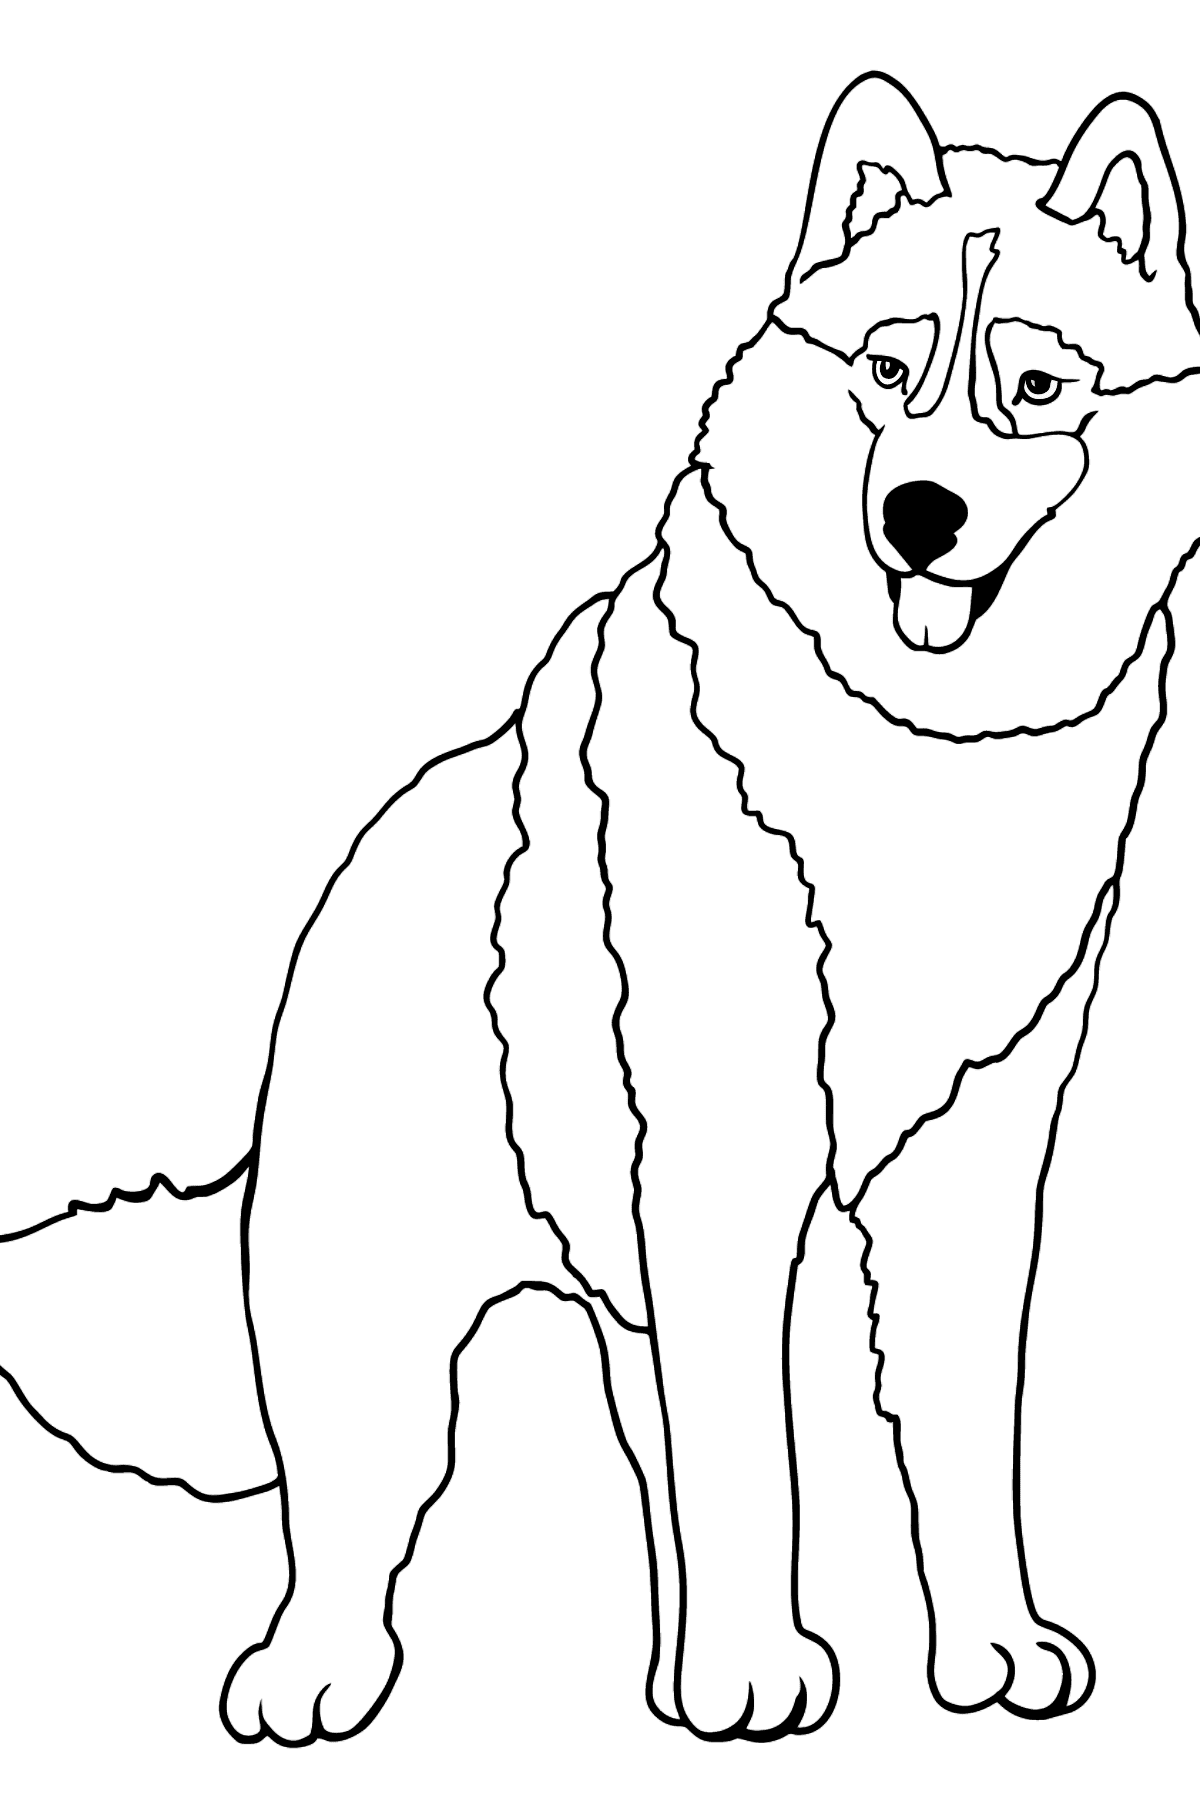 Husky coloring page - Coloring Pages for Kids